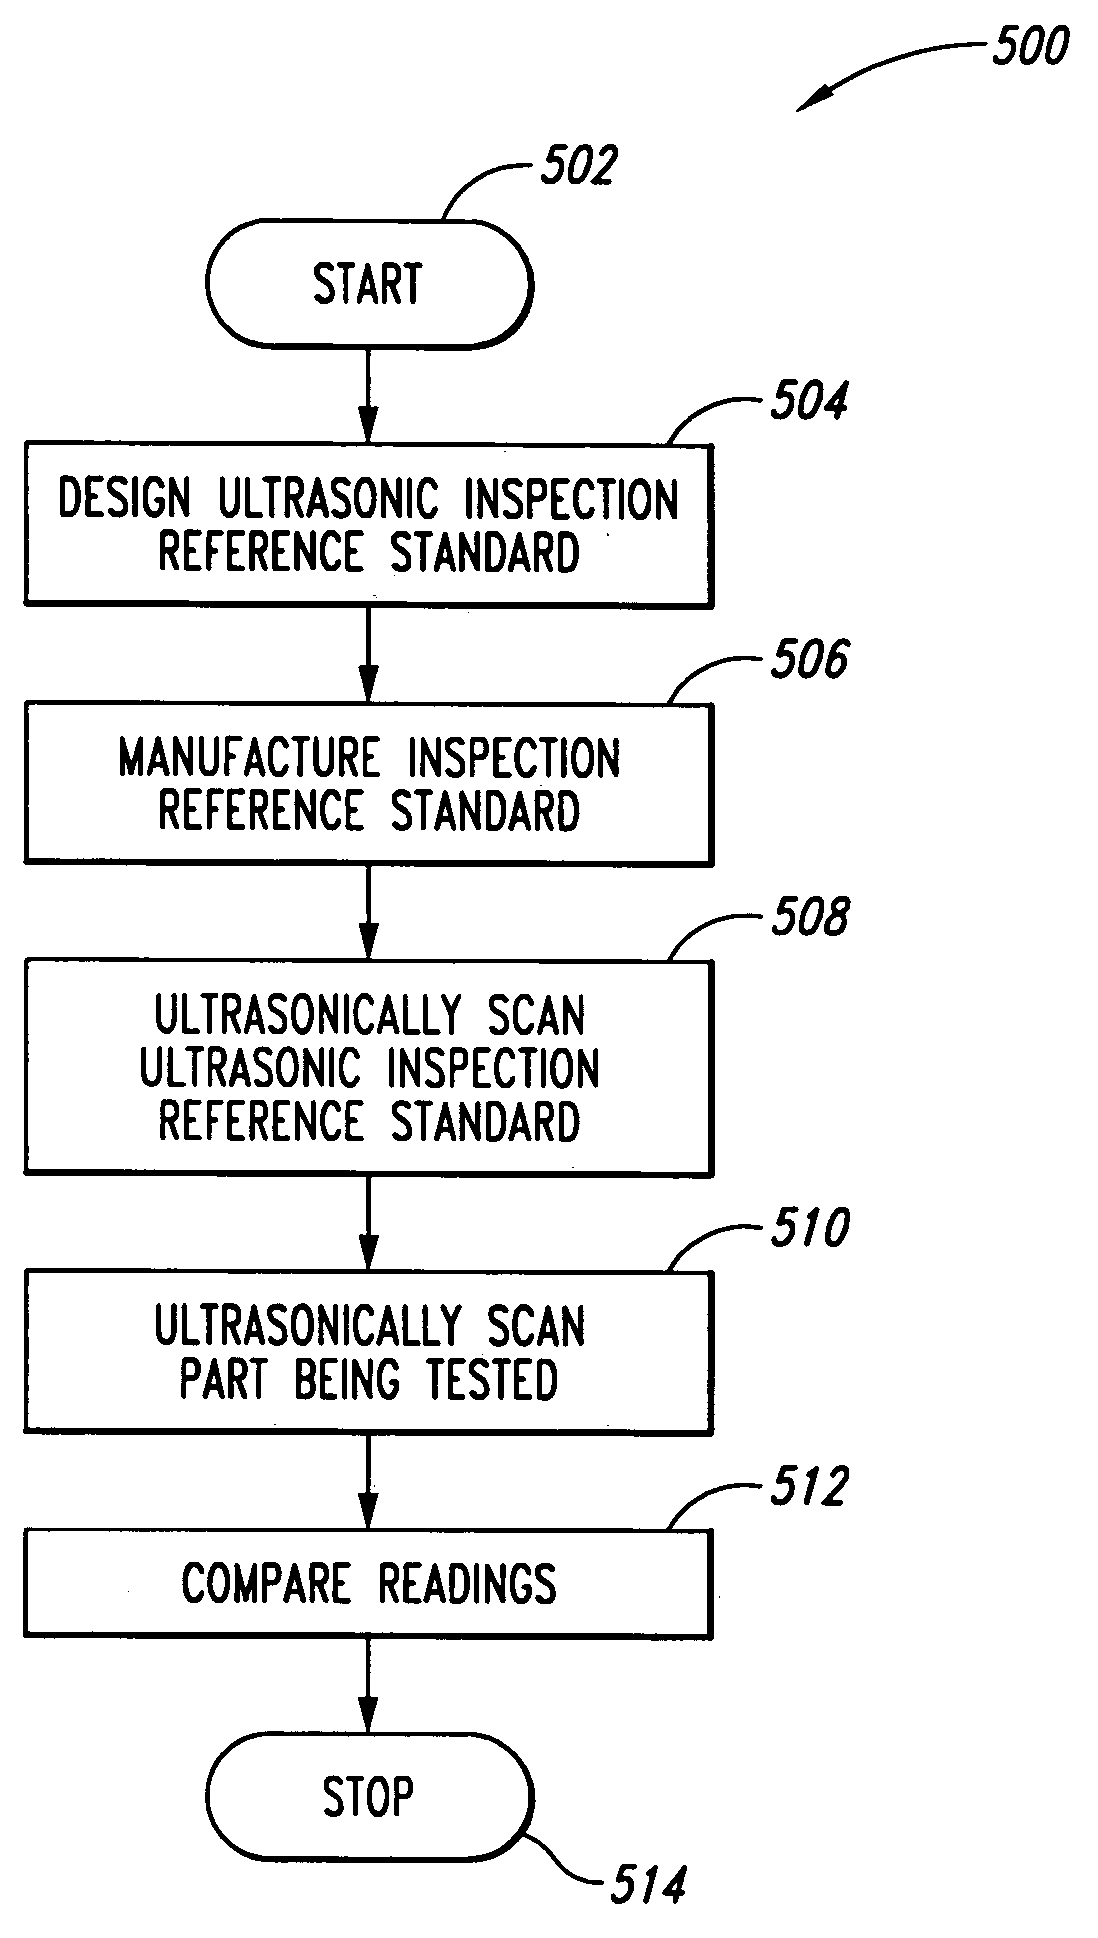 Ultrasonic inspection reference standard for composite materials